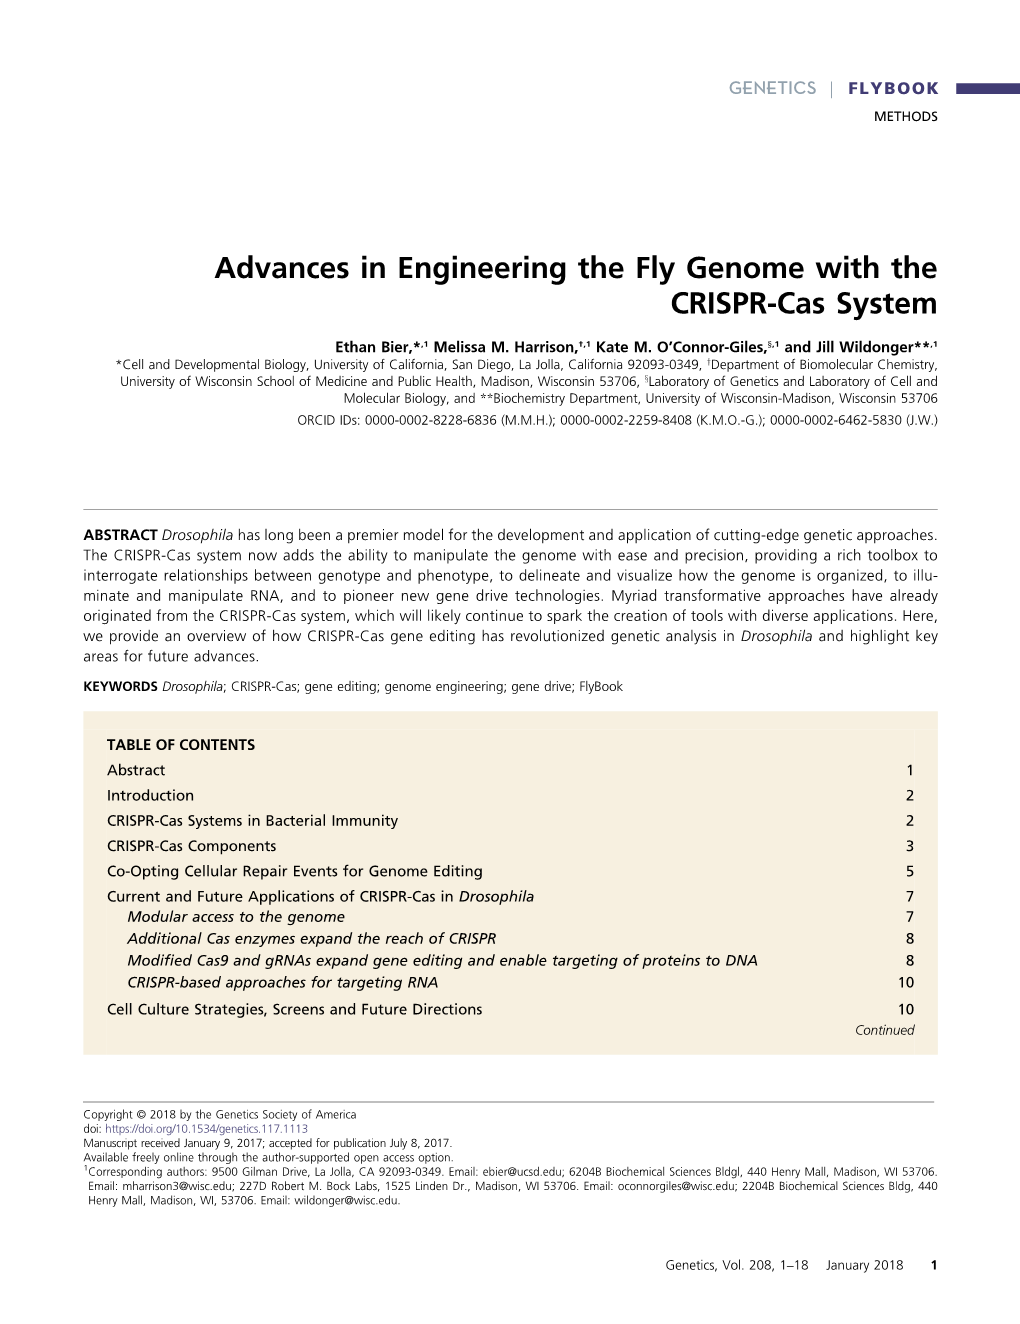 Advances in Engineering the Fly Genome with the CRISPR-Cas System